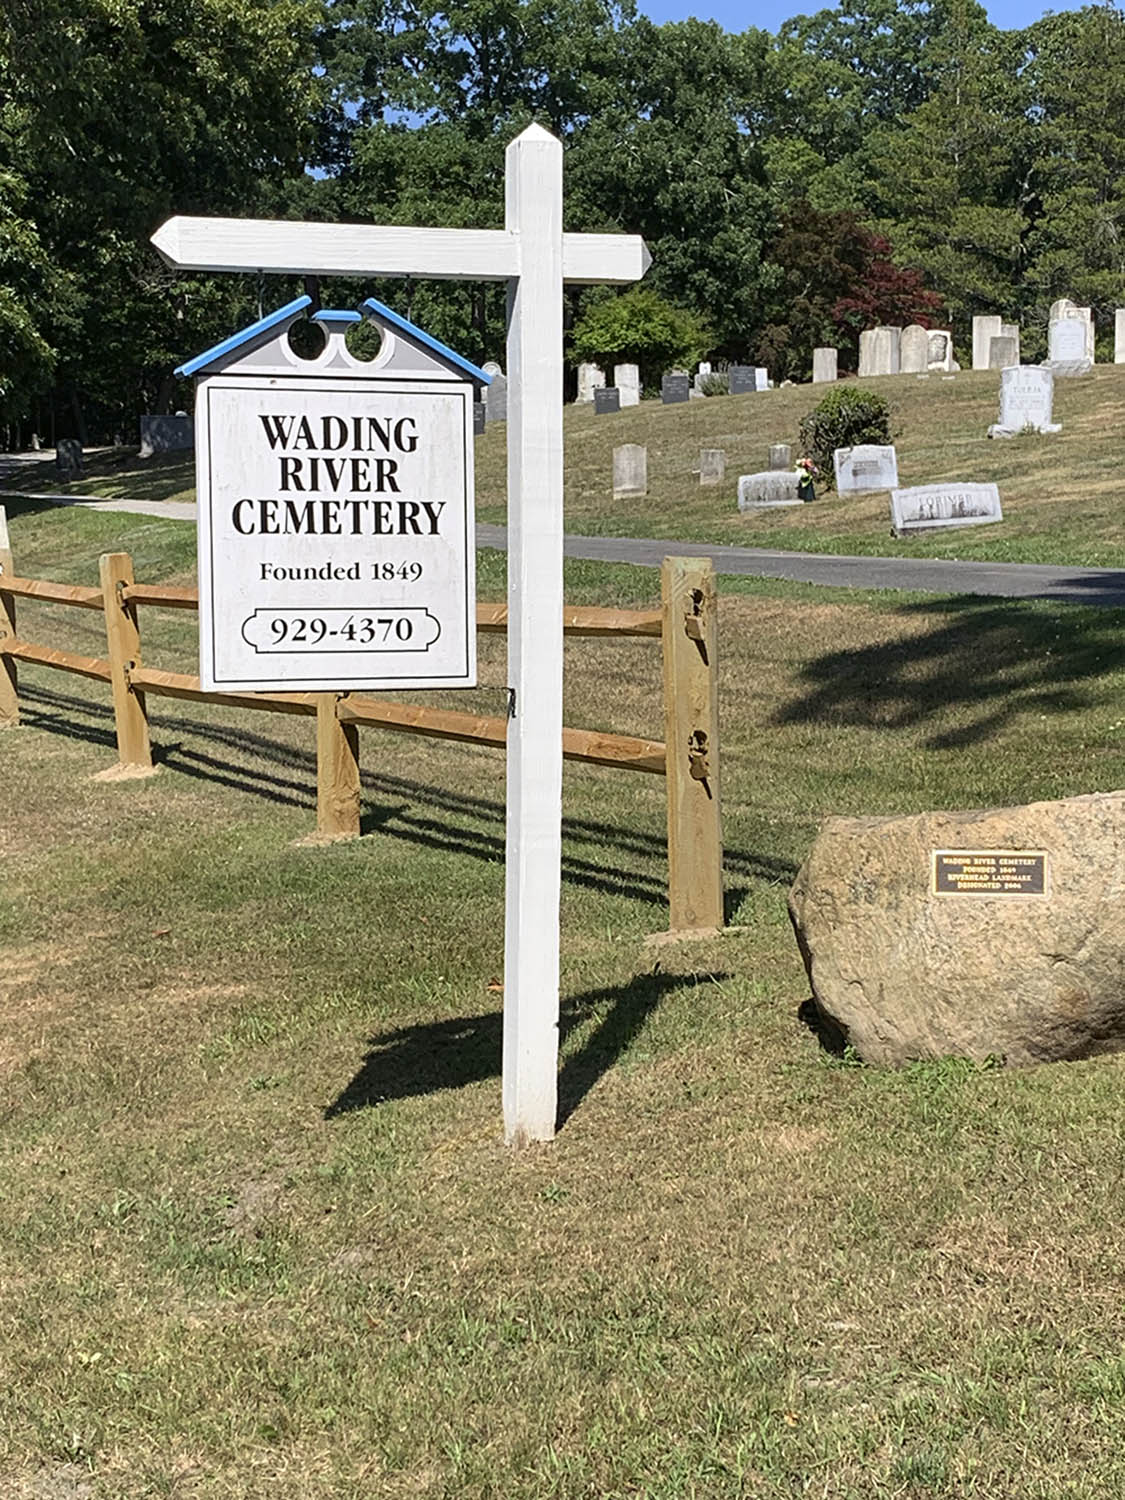 Wading River Cemetery Association